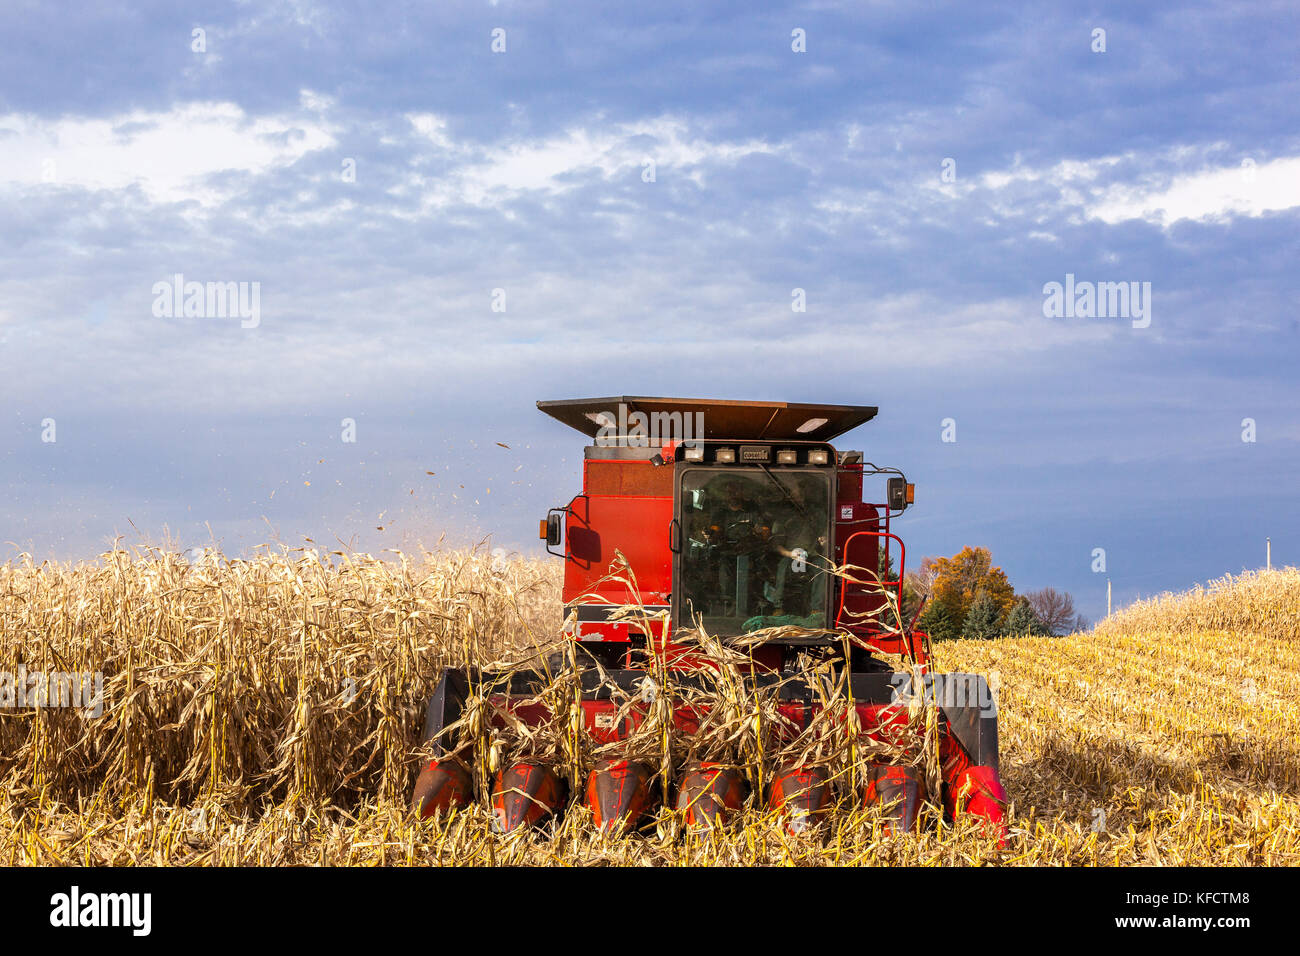 A Case IH combine emerging from the corn stalks while harvesting field corn with a dramatic sky. Stock Photo